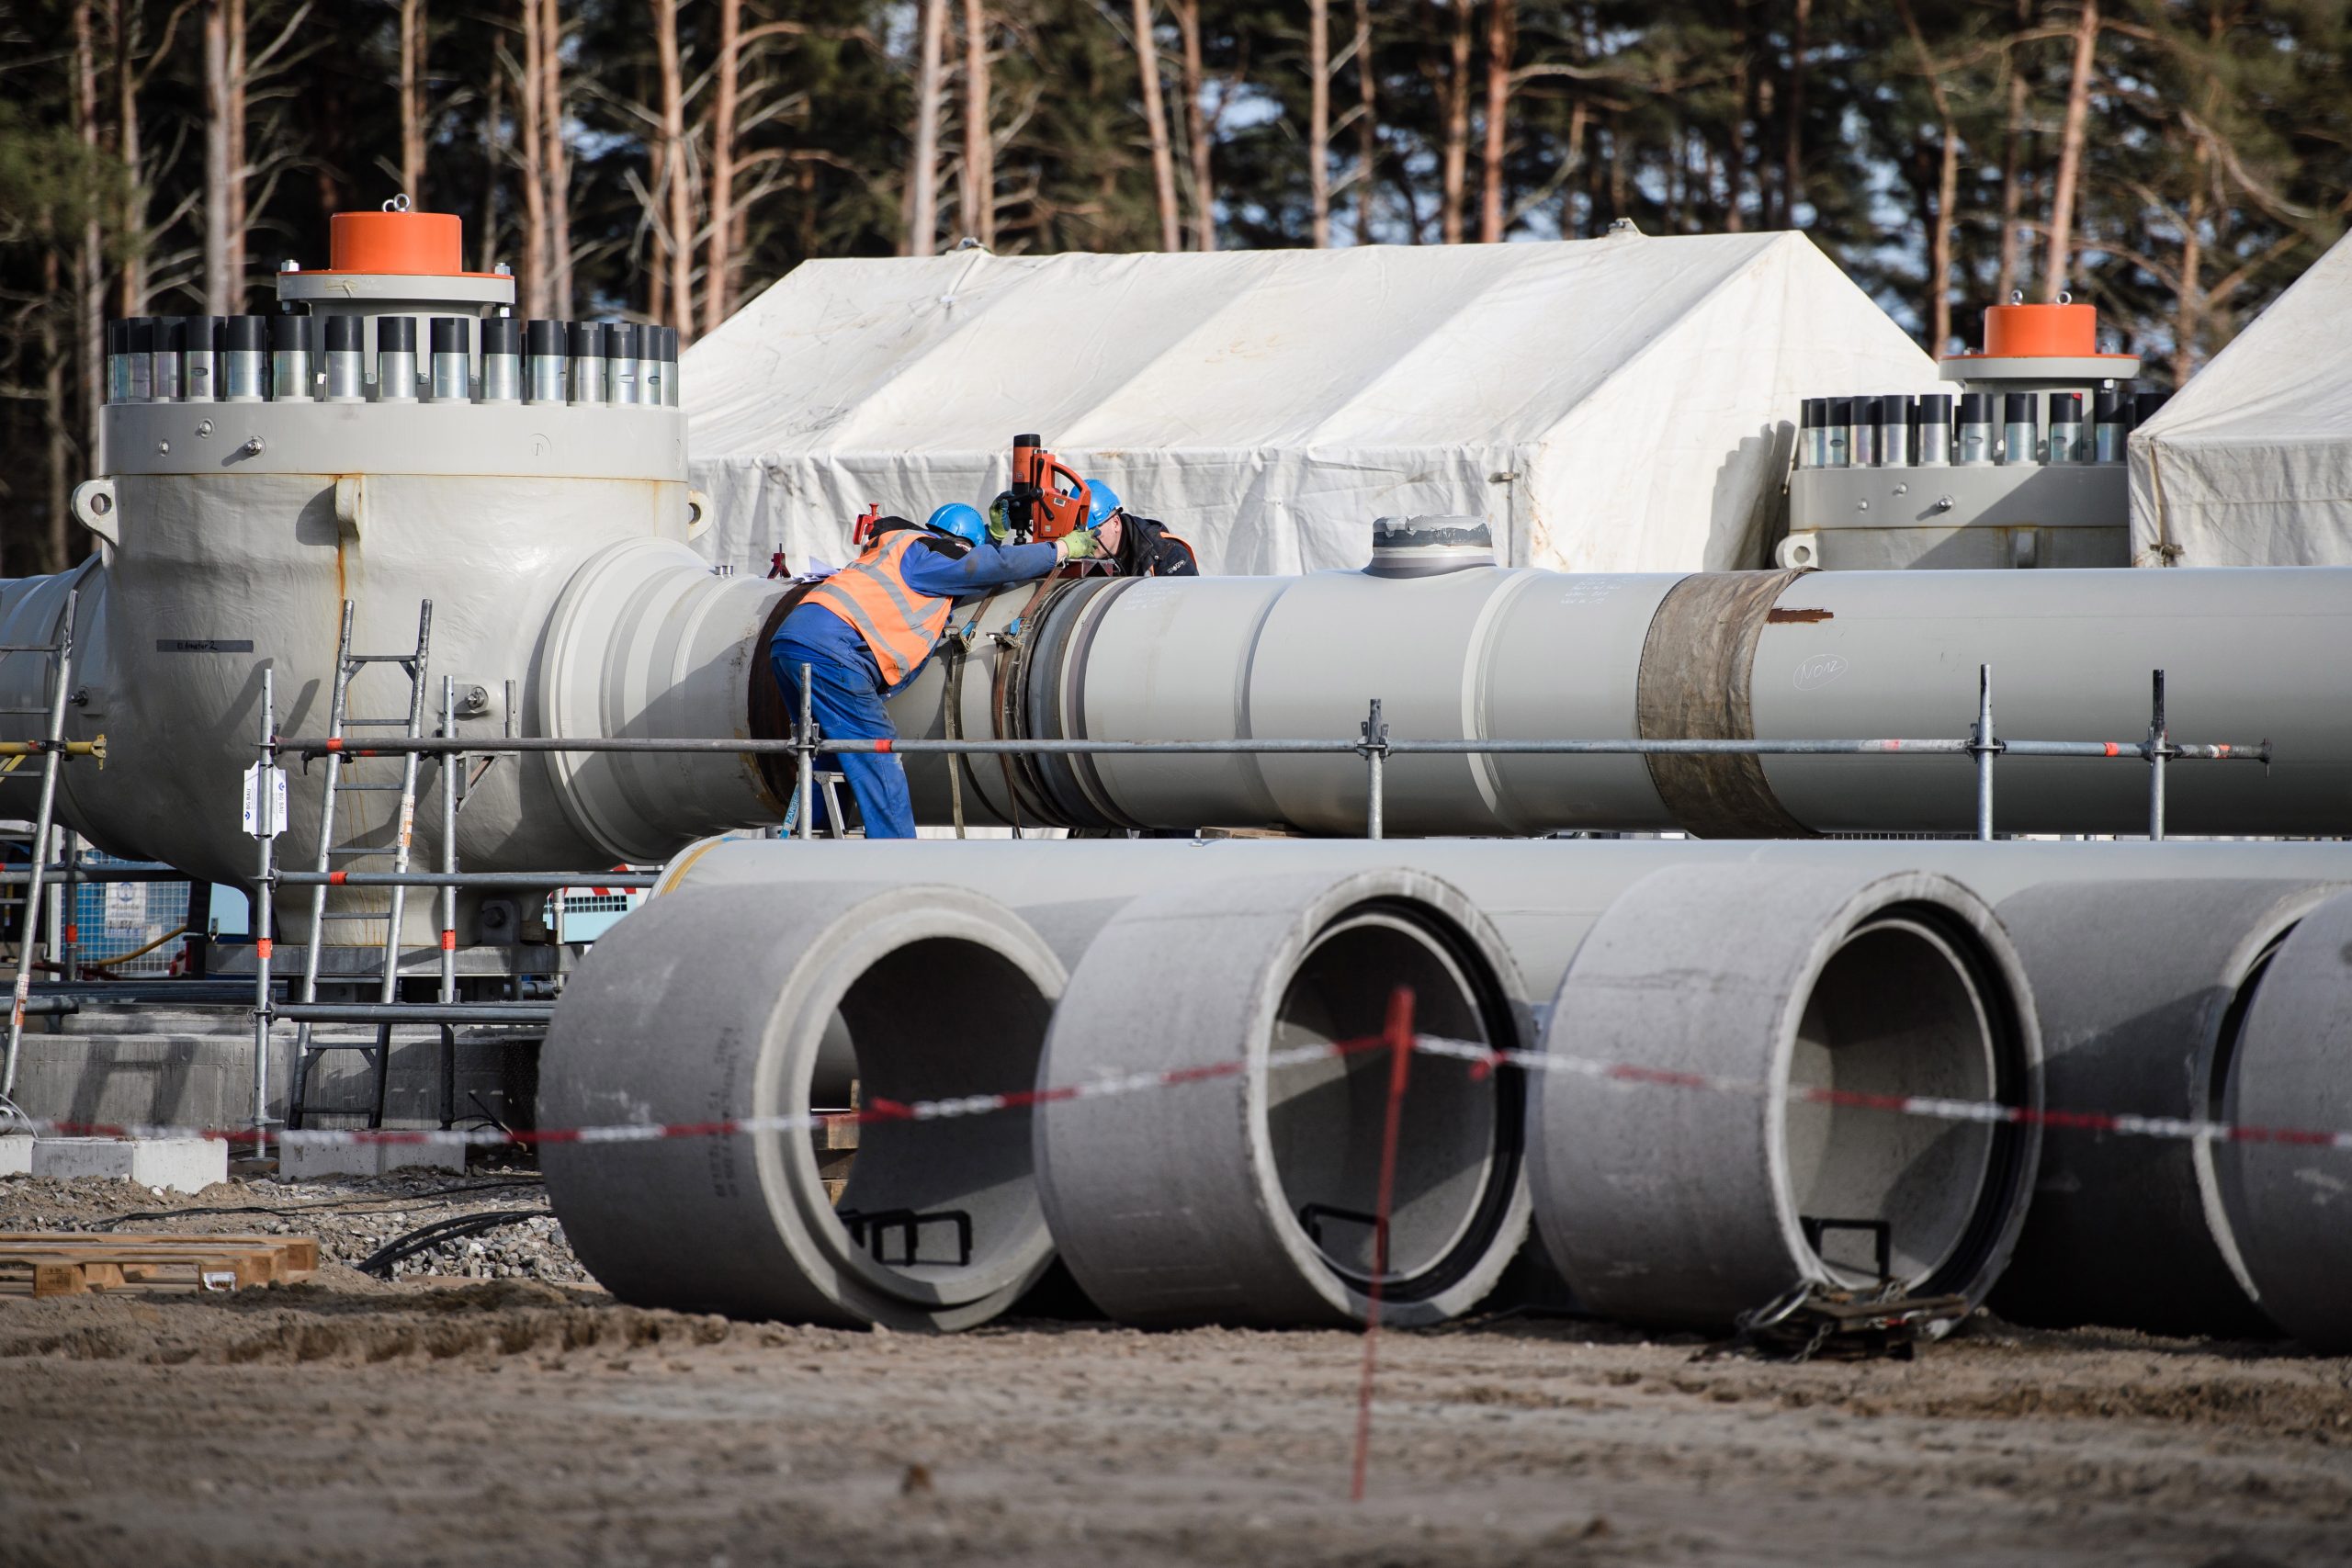 epa08066455 (FILE) - Workers work on a pipeline tube on the construction site of the Nord Stream 2 pipeline in Lubmin, Germany, 26 March 2019 (reissued 12 December 2019). The Nord Stream 2 pipeline with its length of 1230 kilometers runs from the Russian Baltic coast to Germany, subsea. The US House of Representatives has introduced sanctions against companies and individuals involved in the Nord Stream 2 pipeline project.  EPA/CLEMENS BILAN